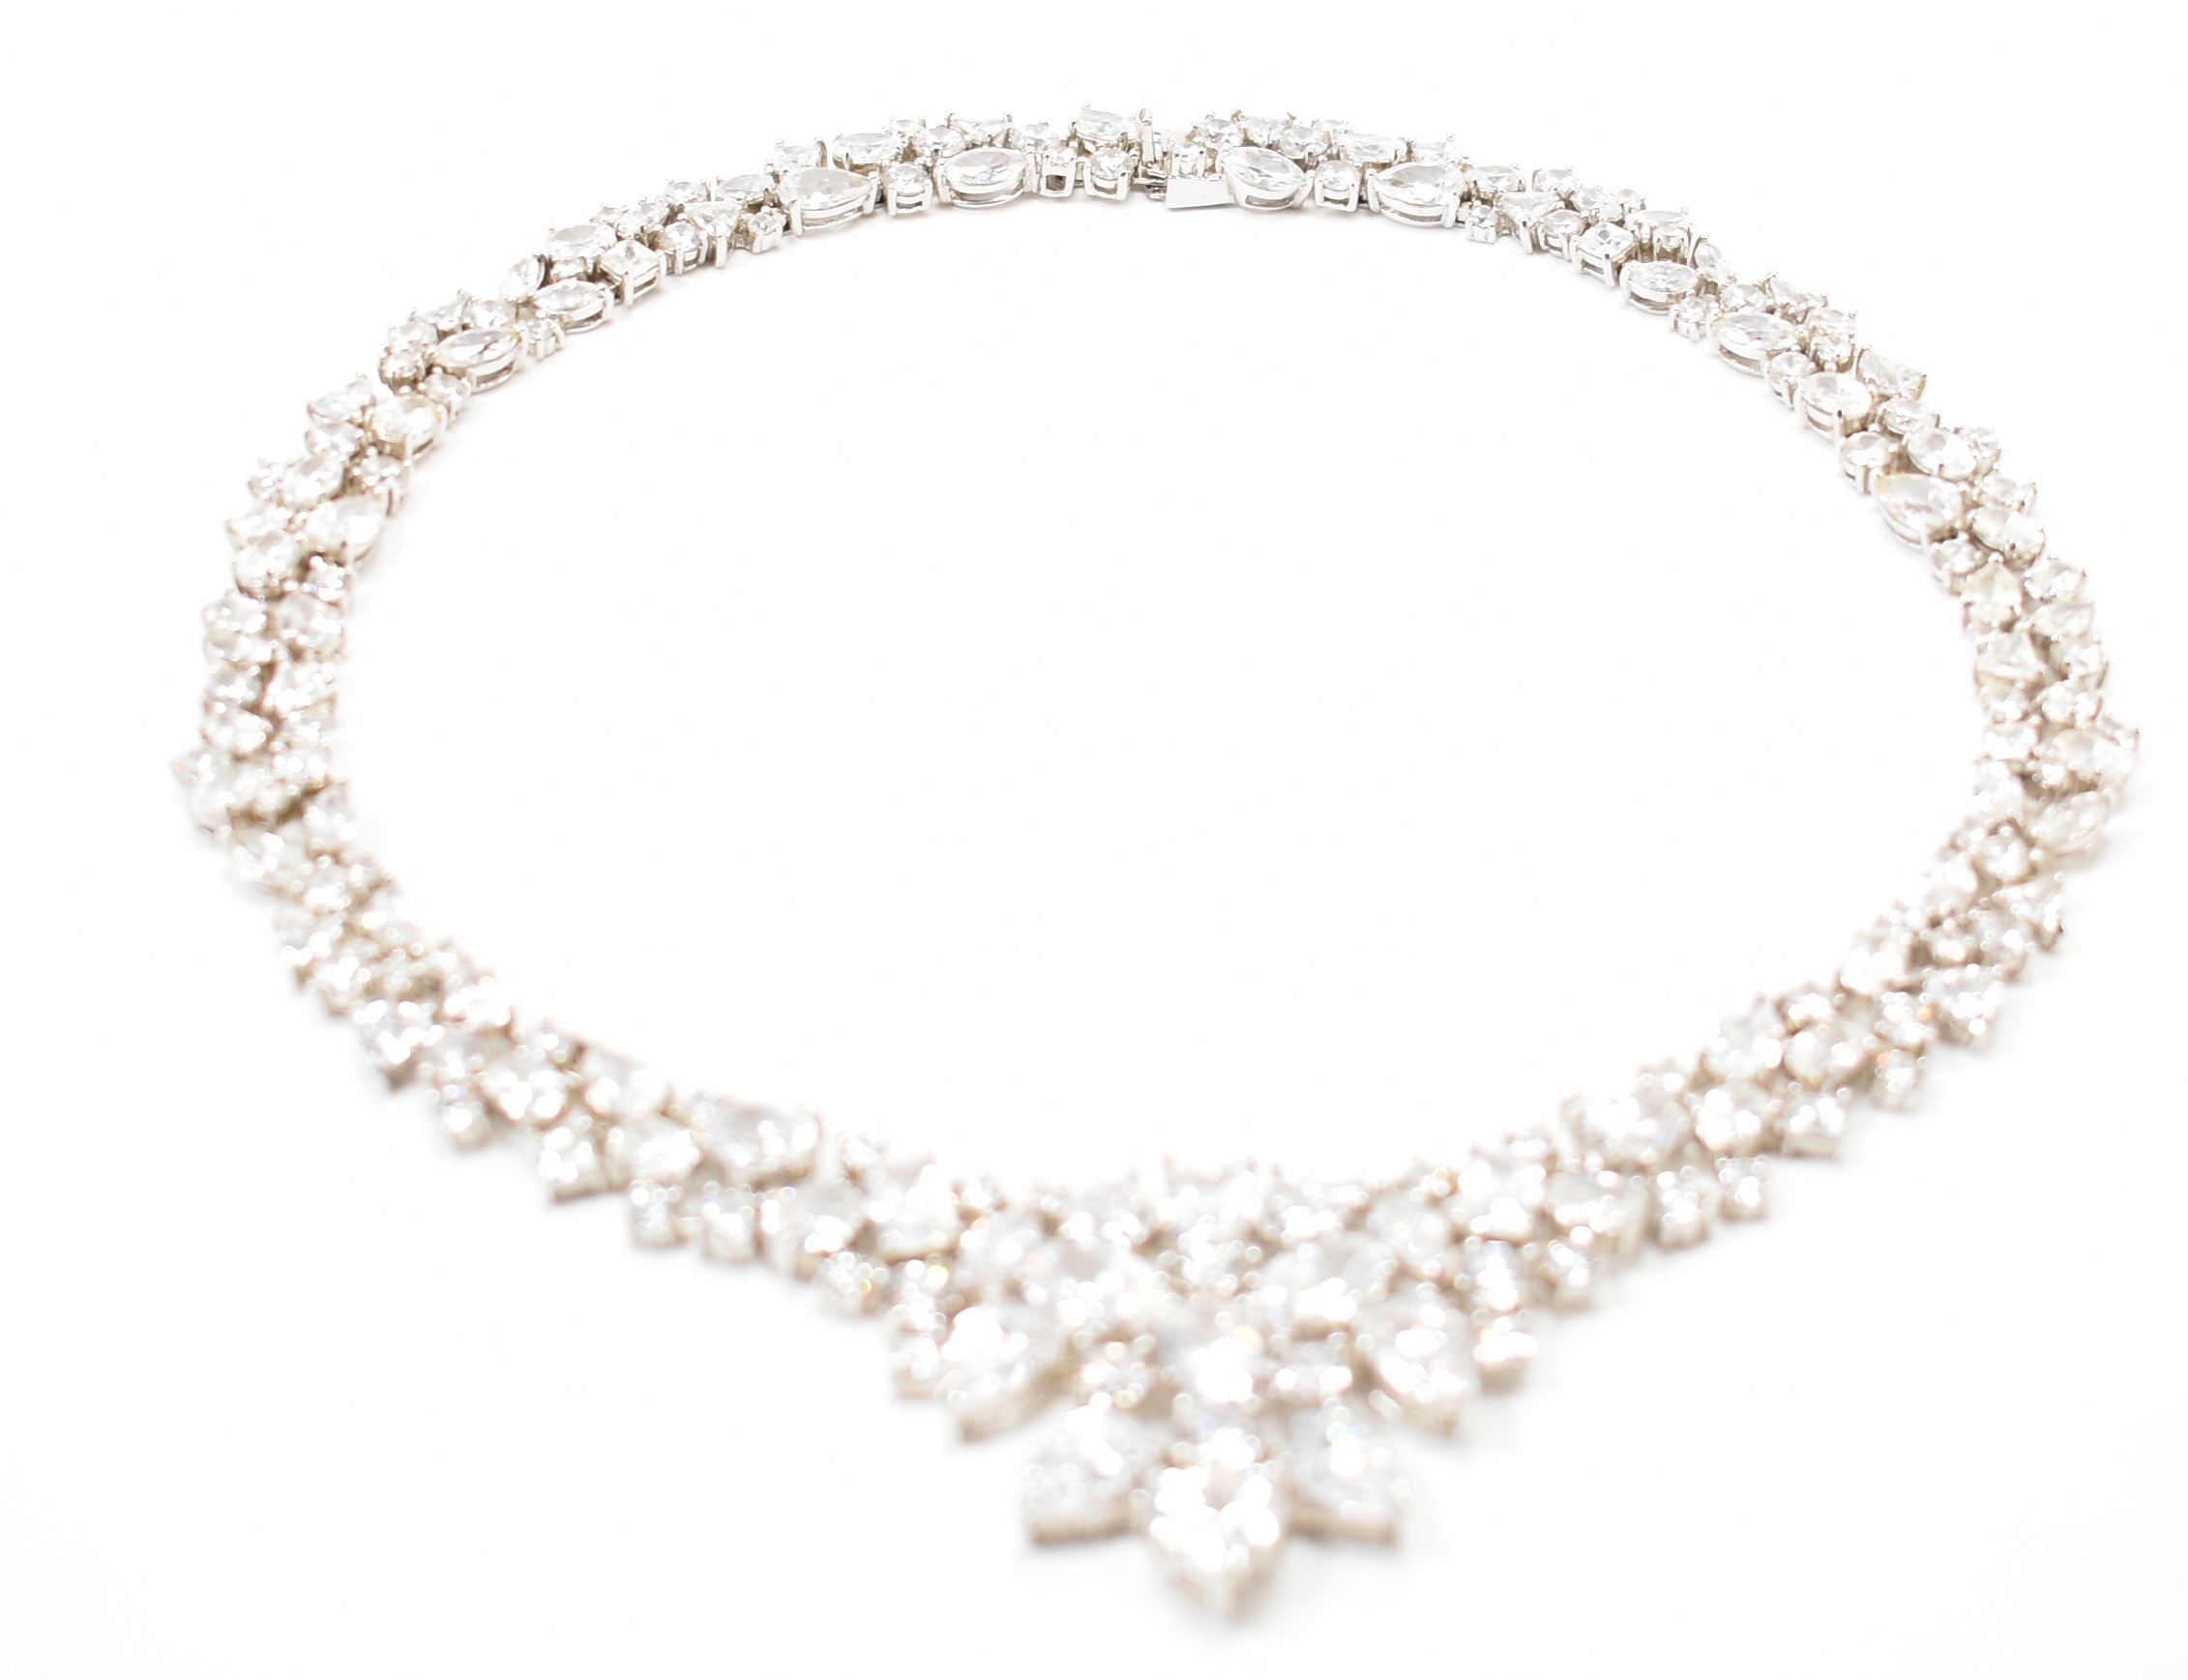 925 SILVER & CUBIC ZIRCONIA STONE SET COLLAR NECKLACE - Image 3 of 5